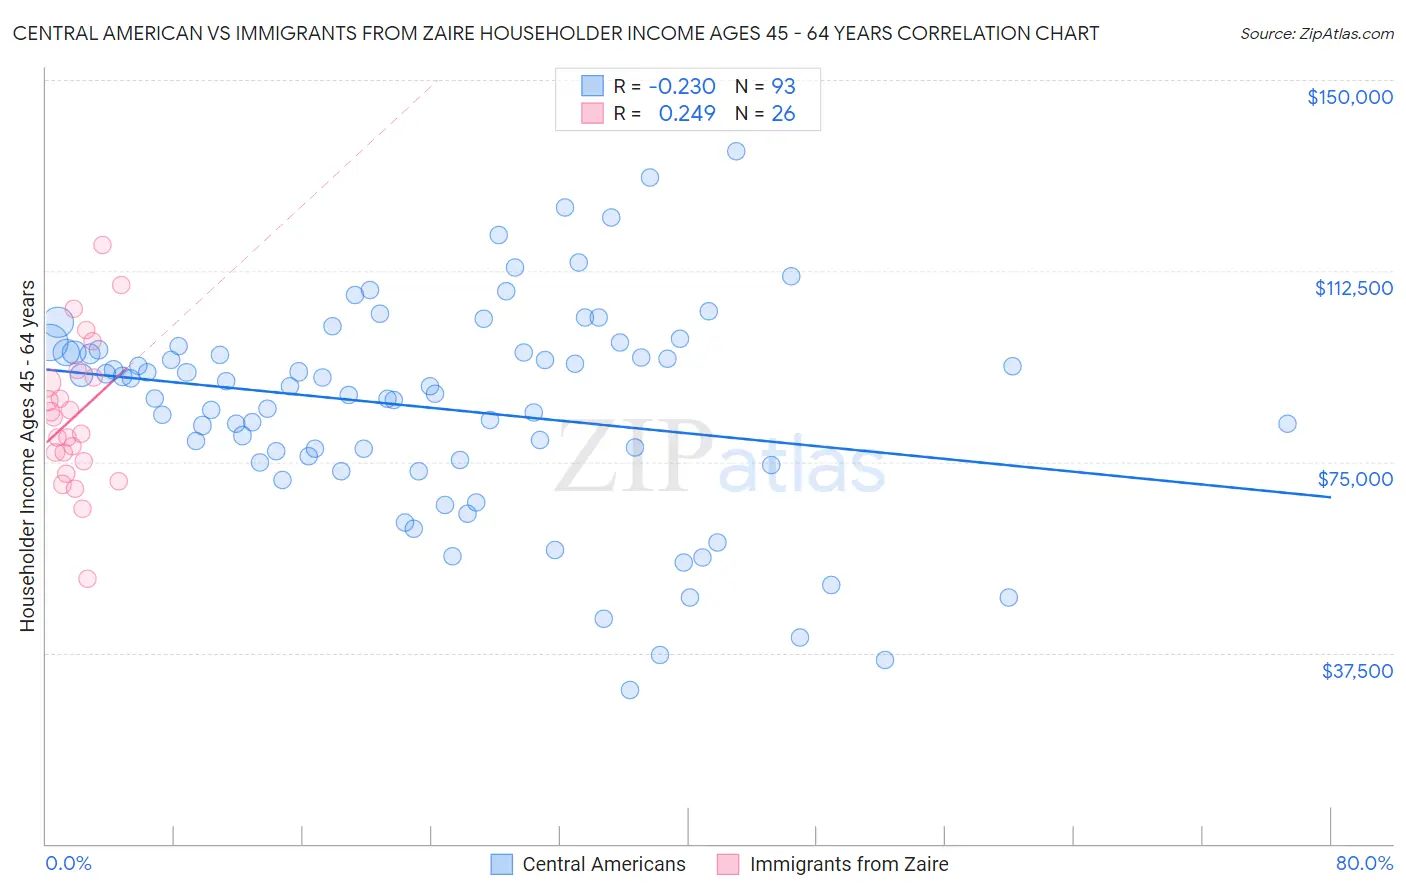 Central American vs Immigrants from Zaire Householder Income Ages 45 - 64 years